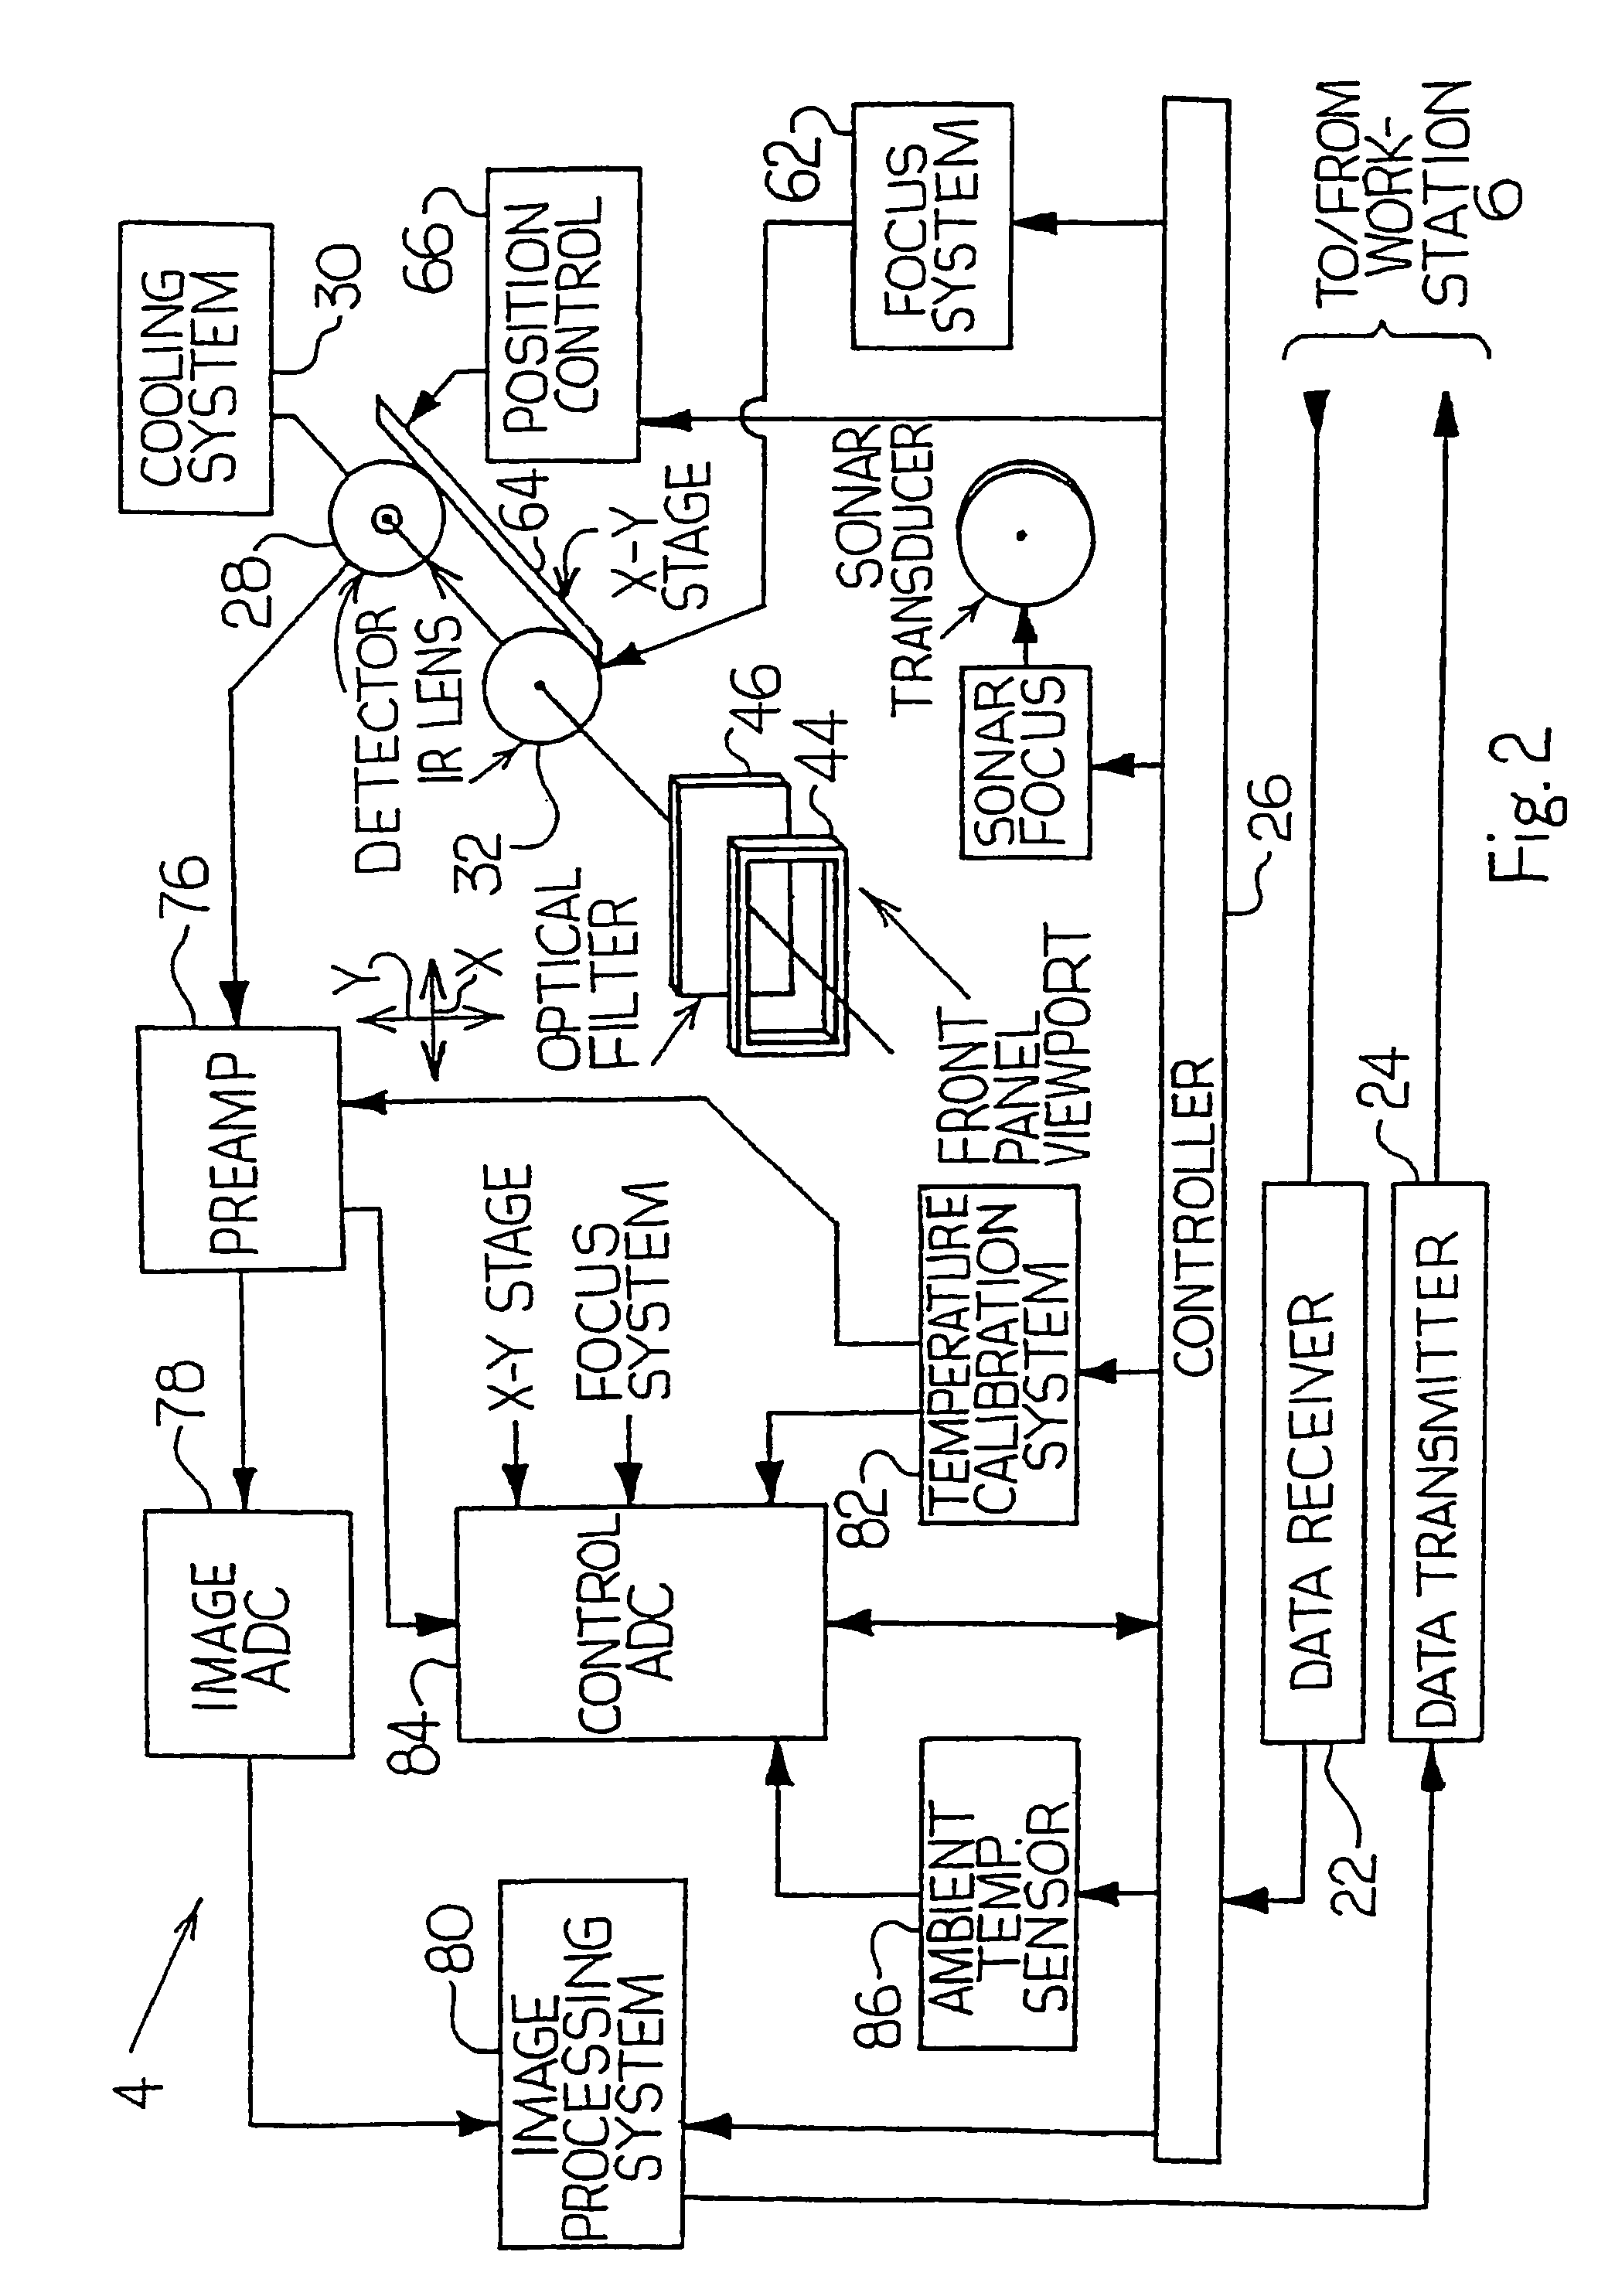 System and method for identifying and classifying dynamic thermodynamic processes in mammals and discriminating between and among such processes